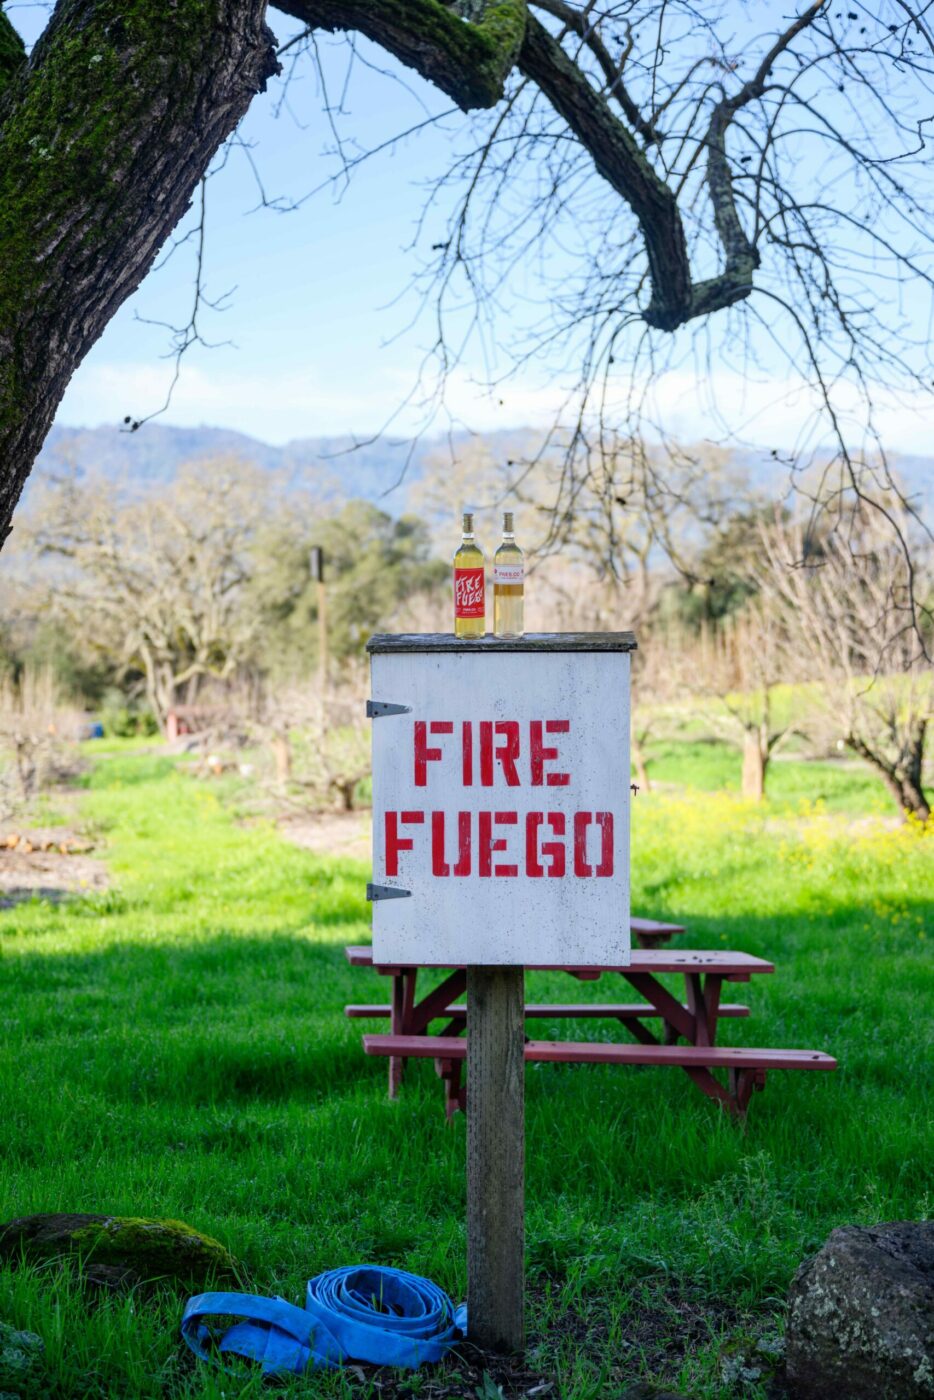  Fire Fuego, a Sauvignon Blanc with a name inspired by a sign on his family's Sonoma Valley farm, is Sporer's signature offering. (James Joiner/For Sonoma Magazine)